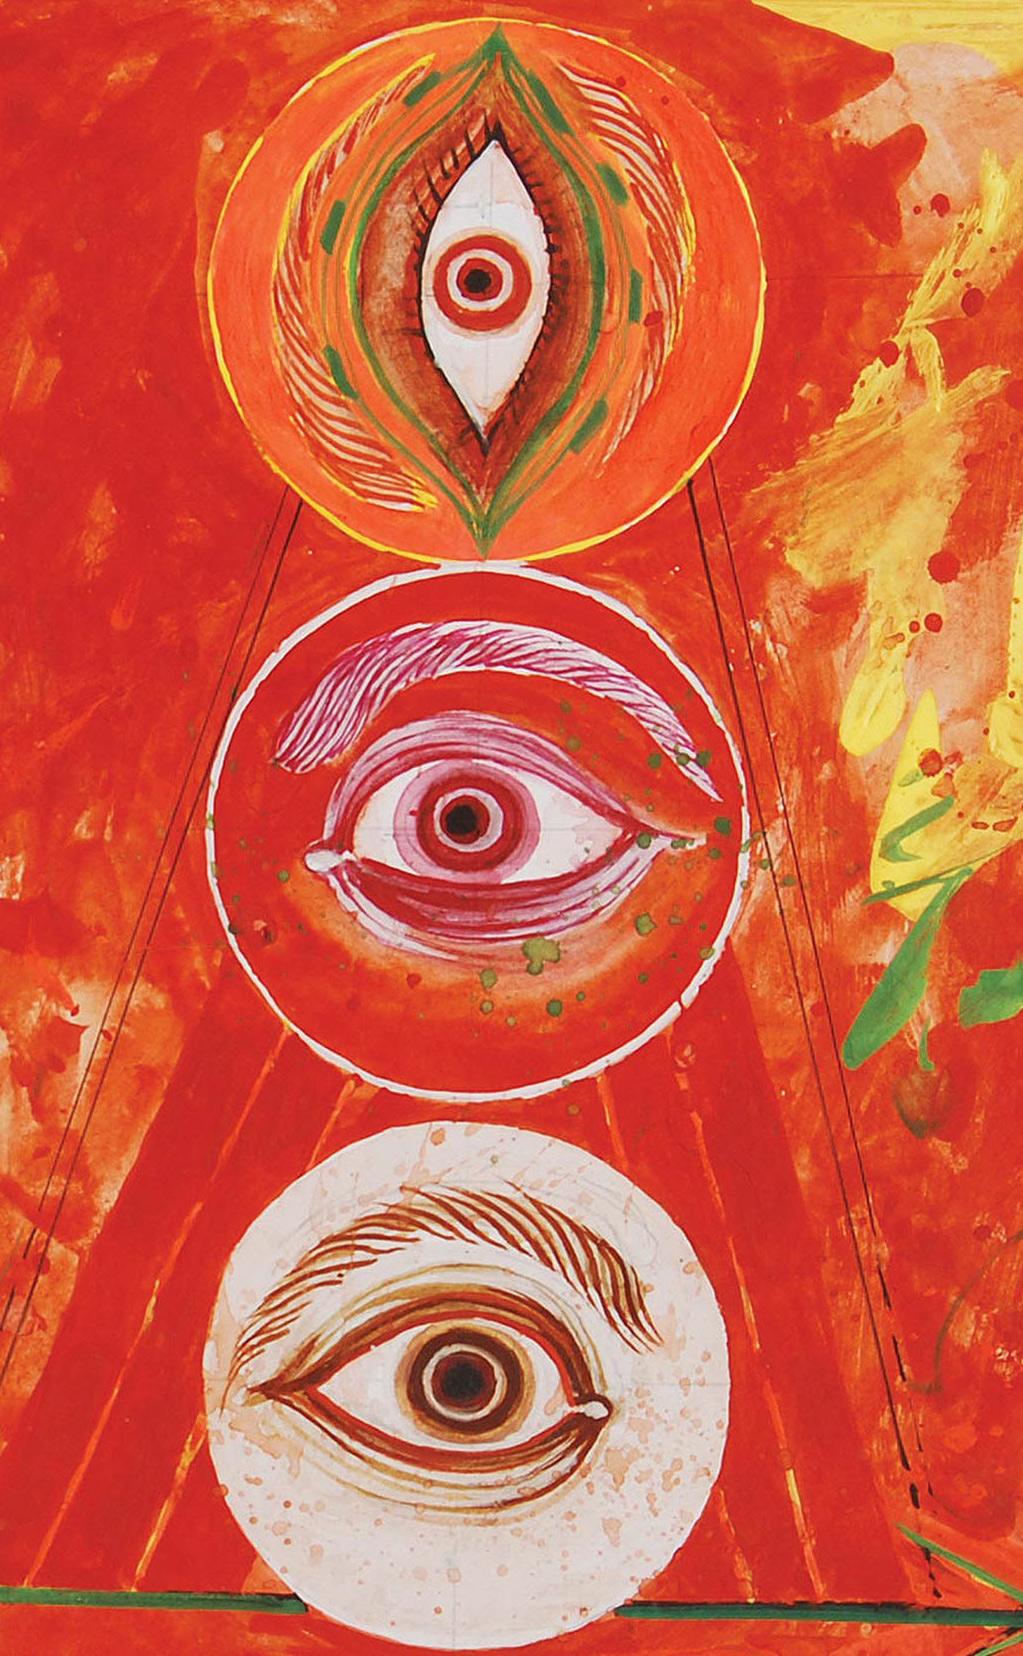 Sunil Das - Durga 97 - 10 x 8 inches (unframed size)
Durga the Third Eye. 
Mixed Media on Board 
Inclusive of shipment in ready to hang form.

In Indian Mythology the Goddess Durga had a Third eye which made her see all the things that an ordinary